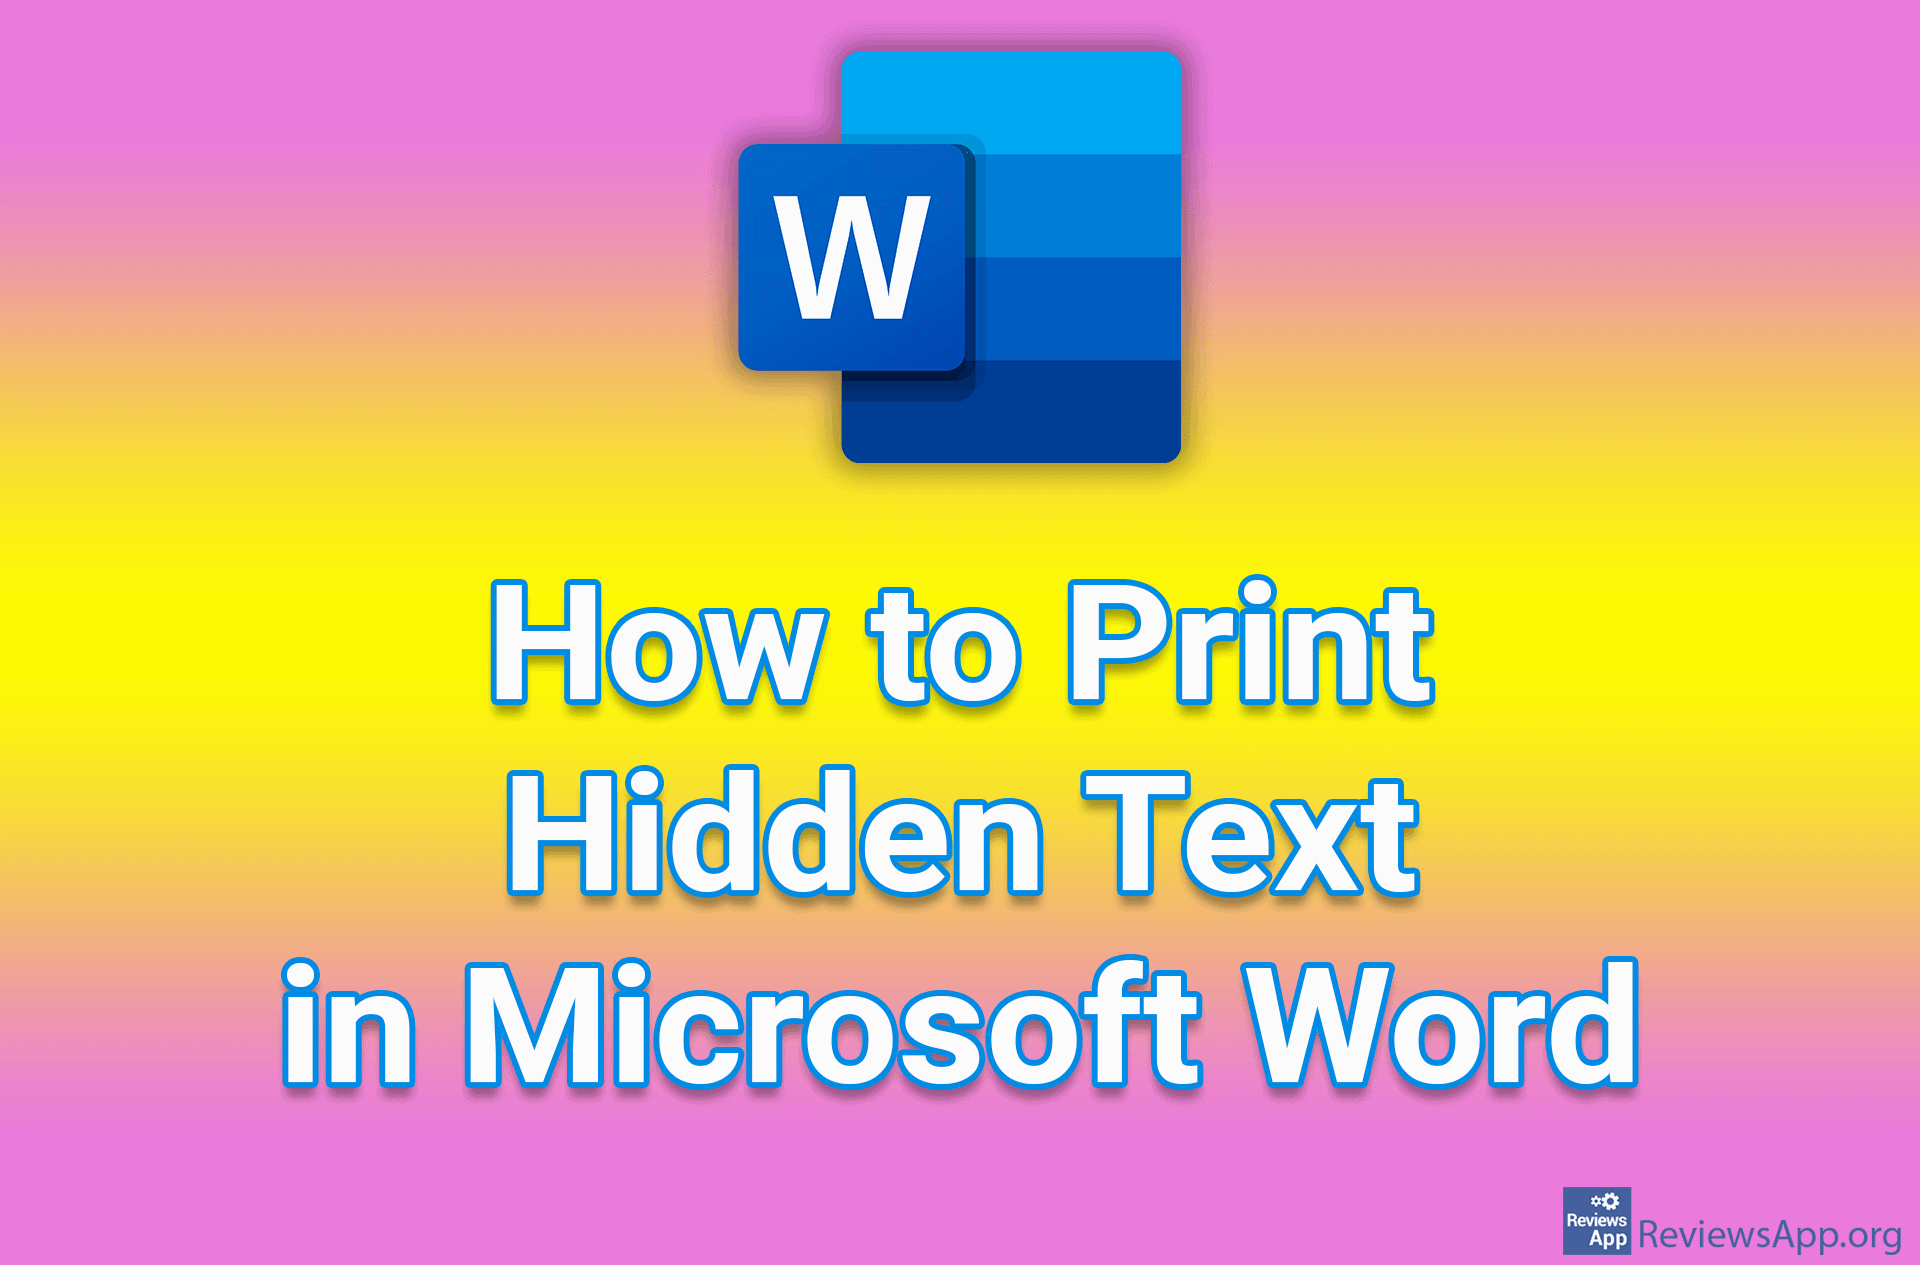 How to Print Hidden Text in Microsoft Word